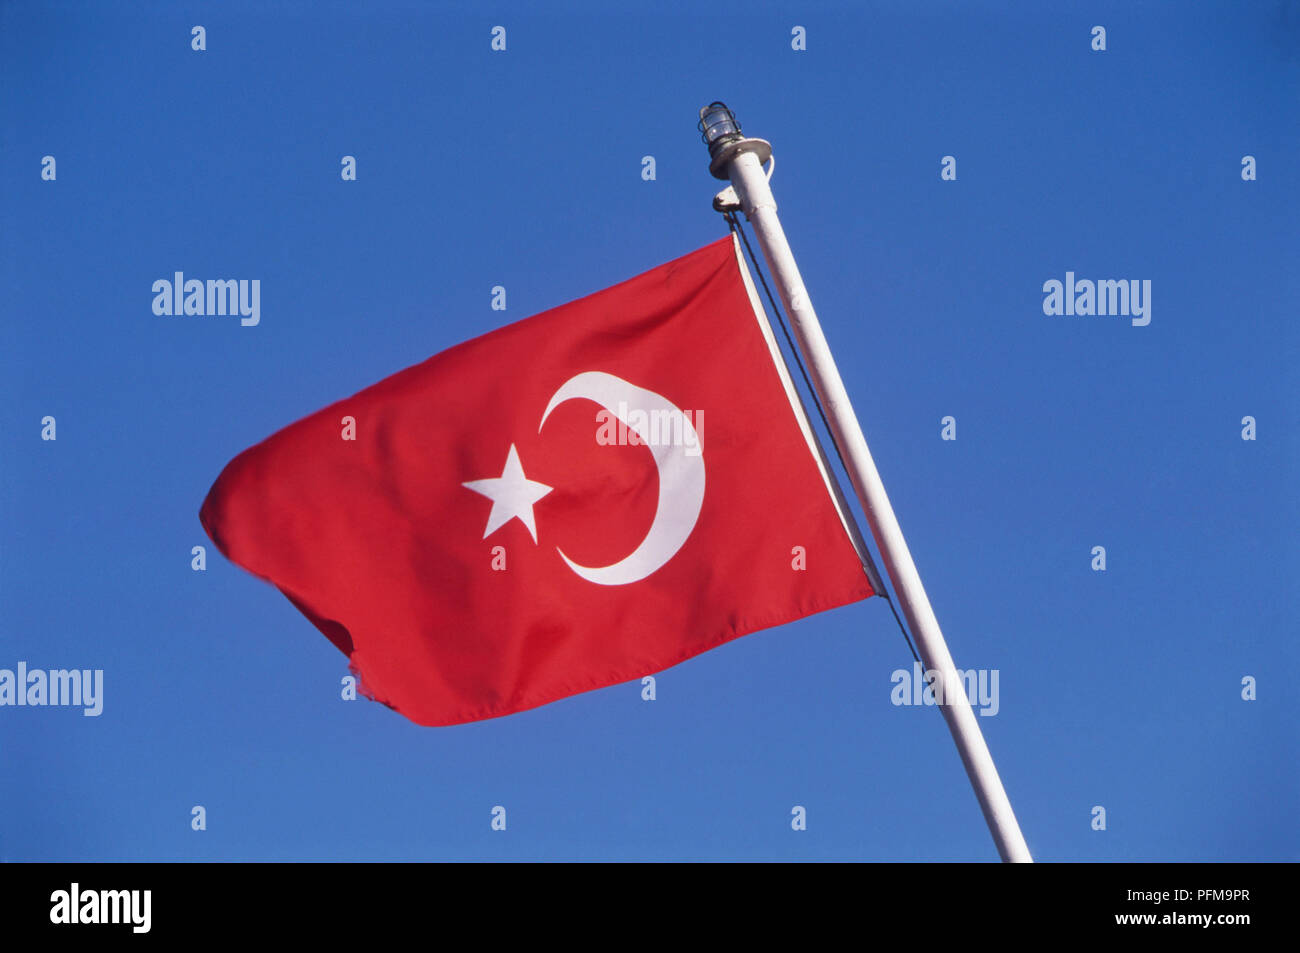 Turkish flag on white flagpole blowing in the breeze, deep blue sky in background. Stock Photo